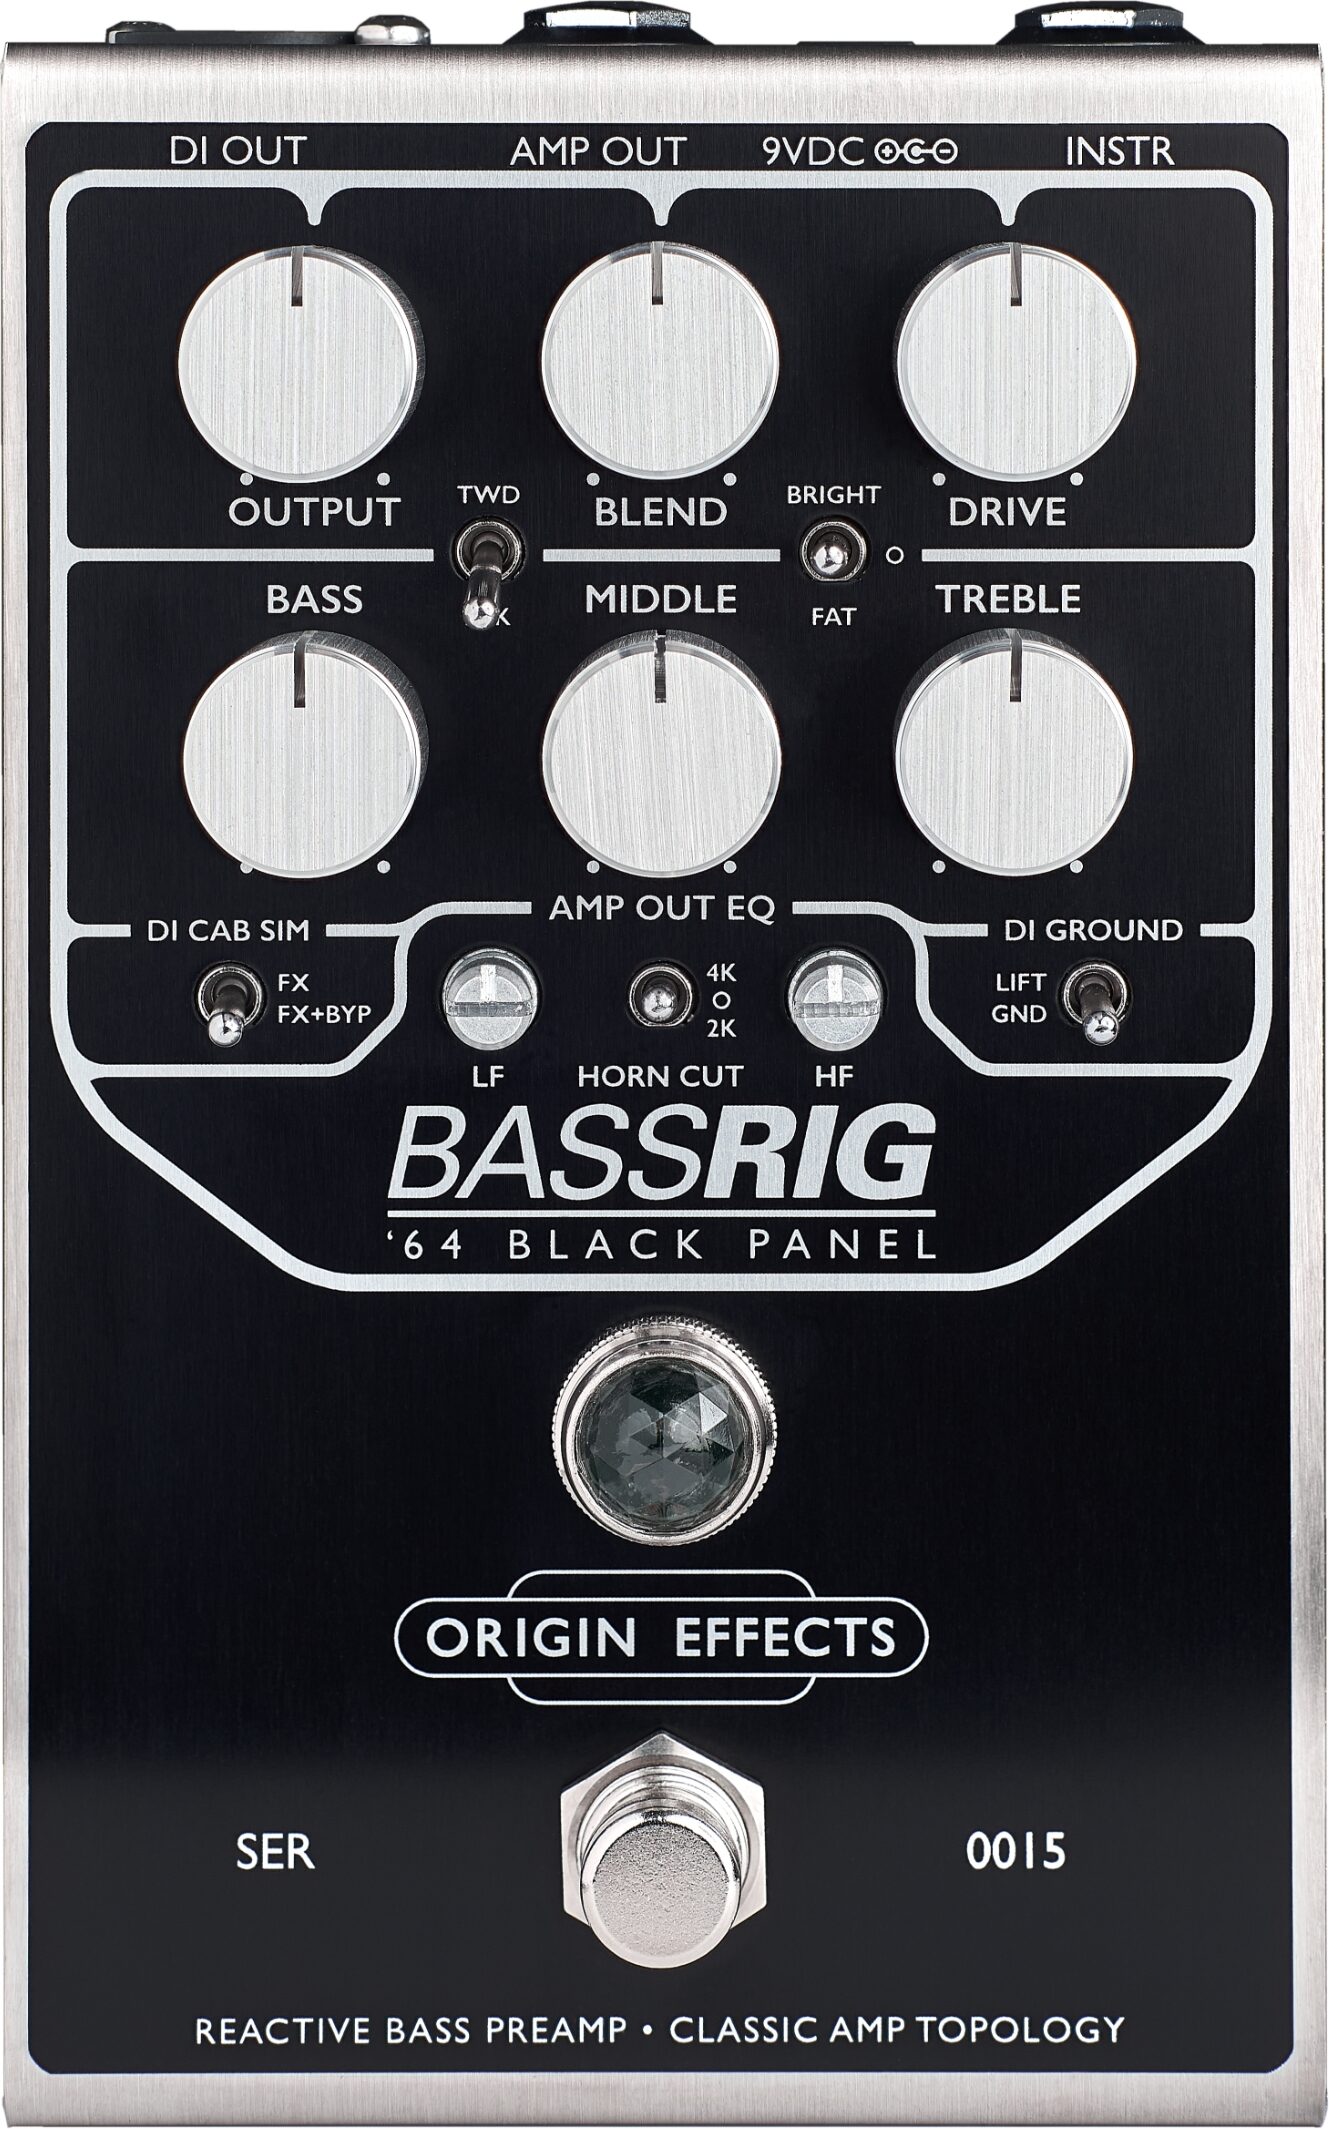 Origin Effects BassRIG '64 Black Panel Preamp and Overdrive Pedal